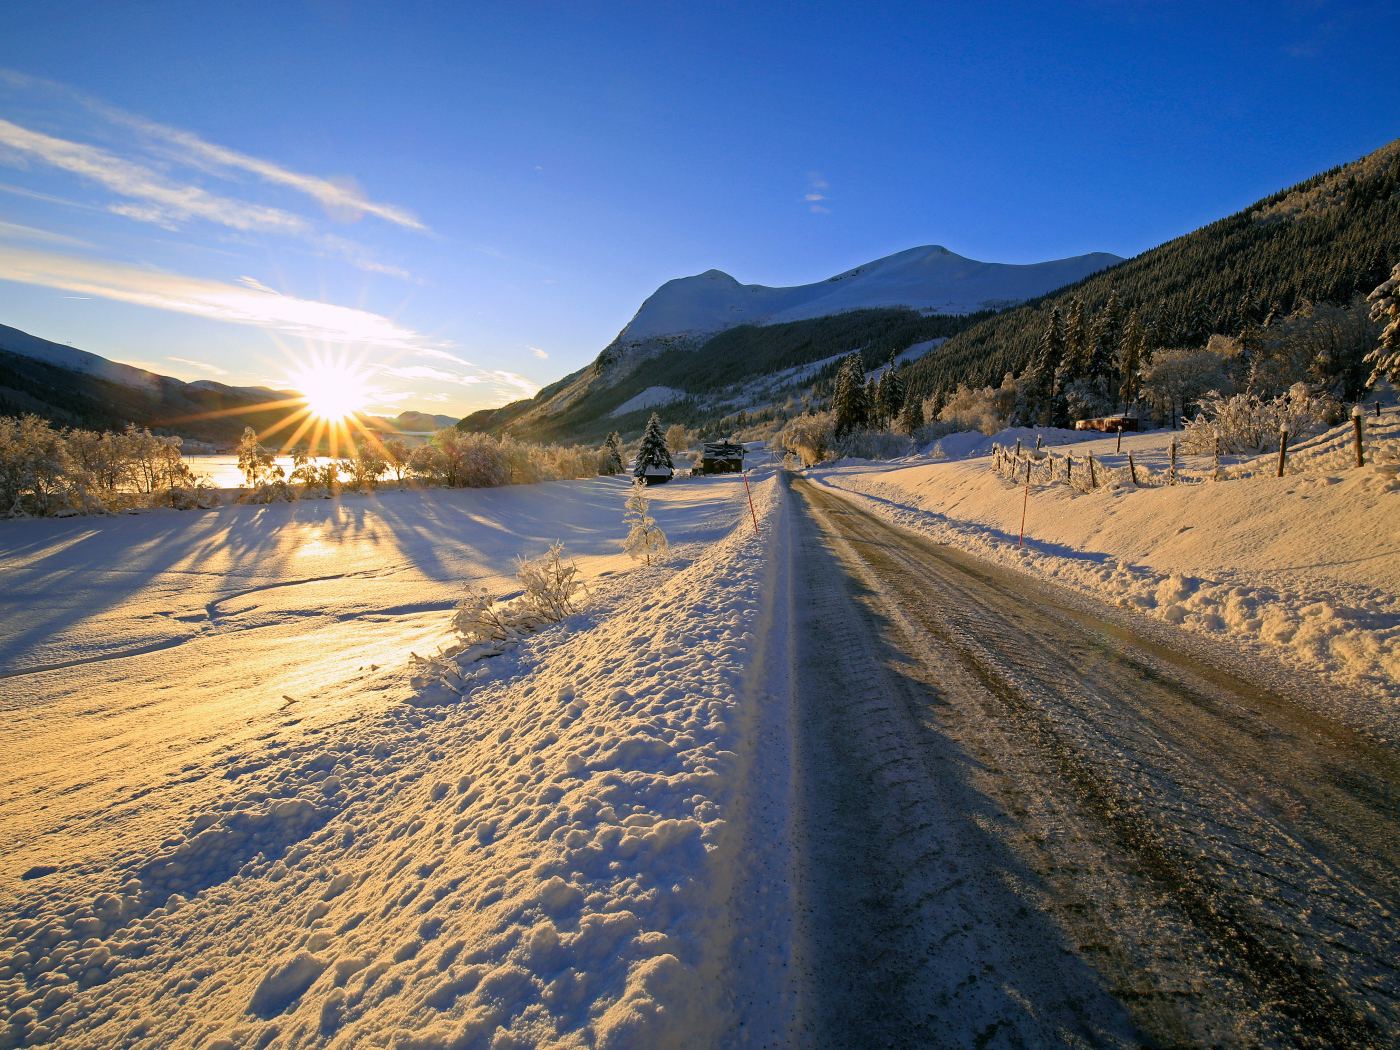 Slippery winter road in the rays of the bright sun